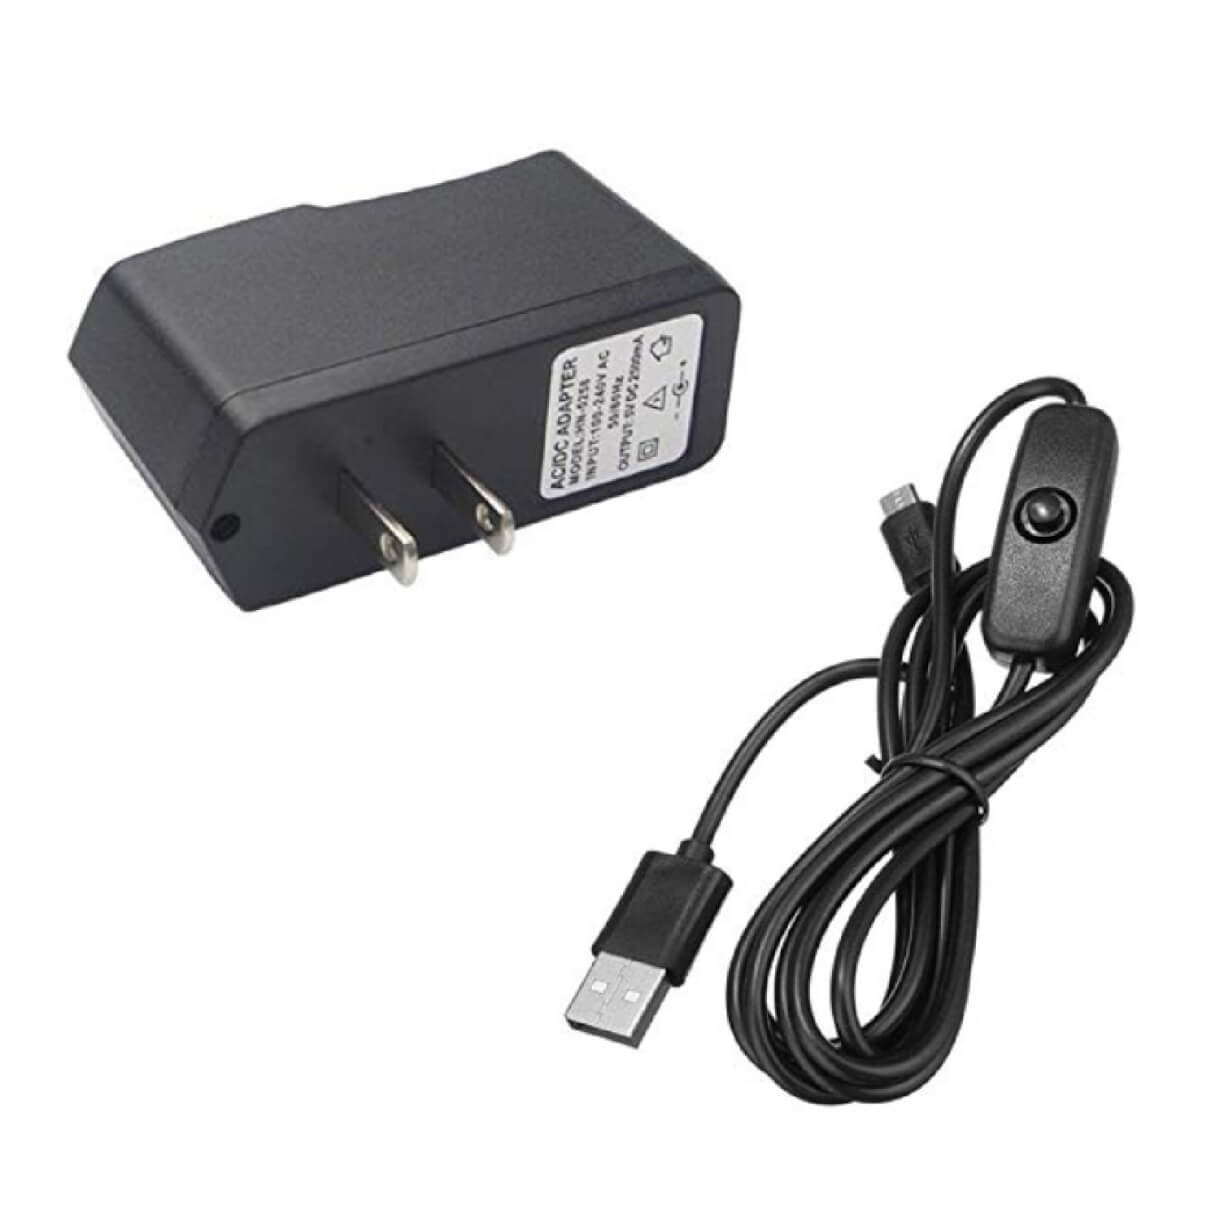 5V/2.5A Power Supply Micro USB Charger - Seattle Makers